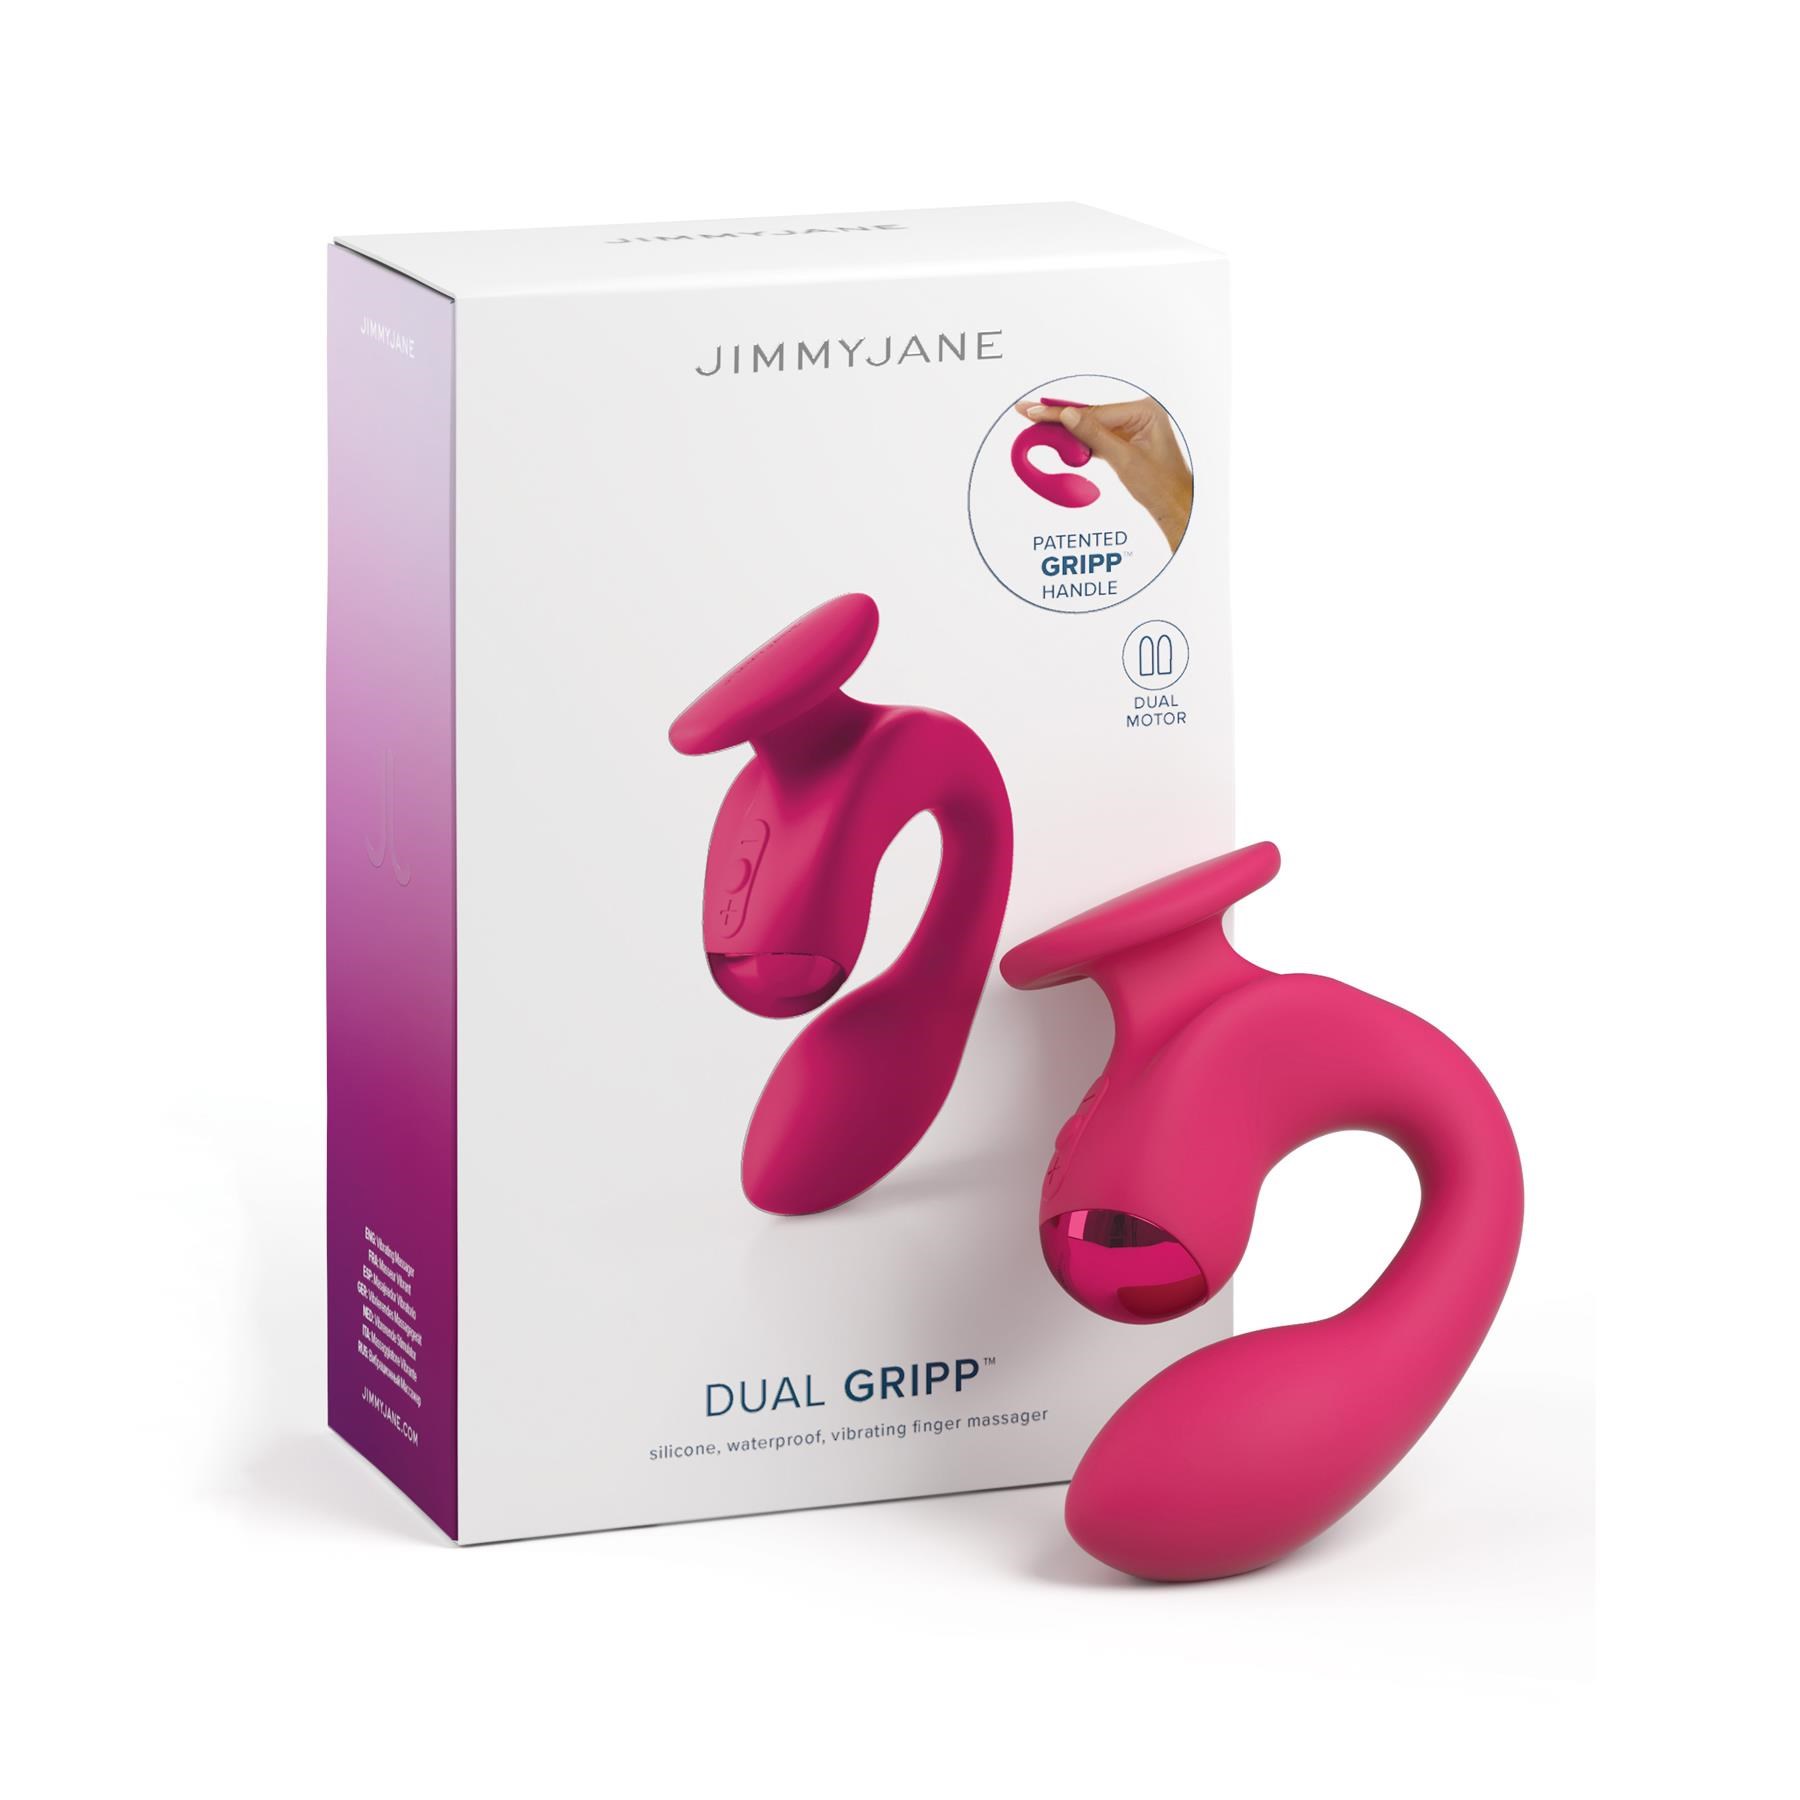 Jimmy Jane Dual Gripp Finger Vibrator - Product and Packaging